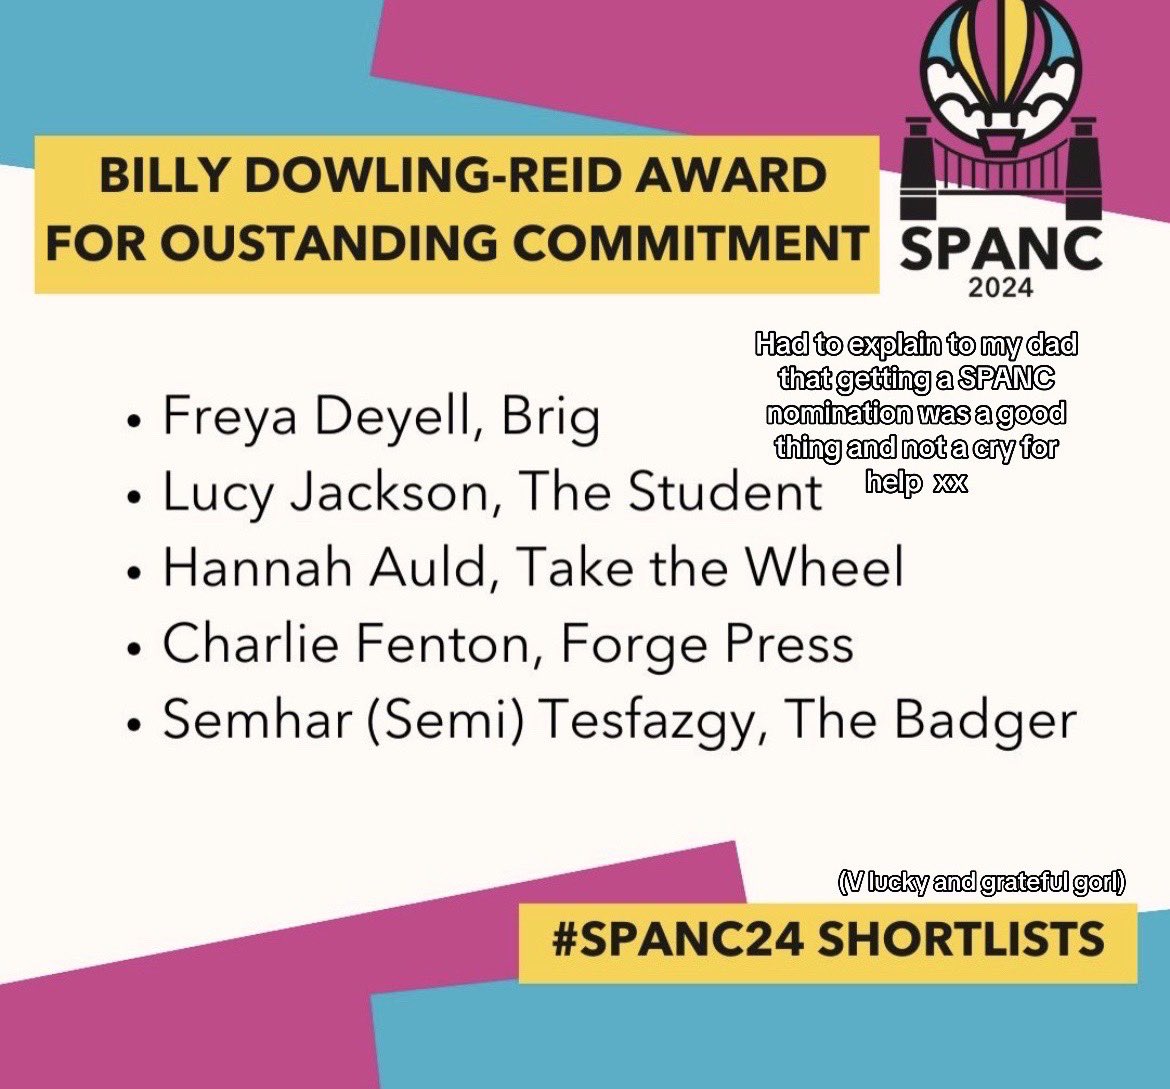 Thrilled to say I have been nominated for a #SPANCAward for outstanding commitment. @takethewheelmag has also been nominated for a #SPACAward!!! Over the moon 🙏 @sheffjournalism @SPAJournalism #studentjournalist